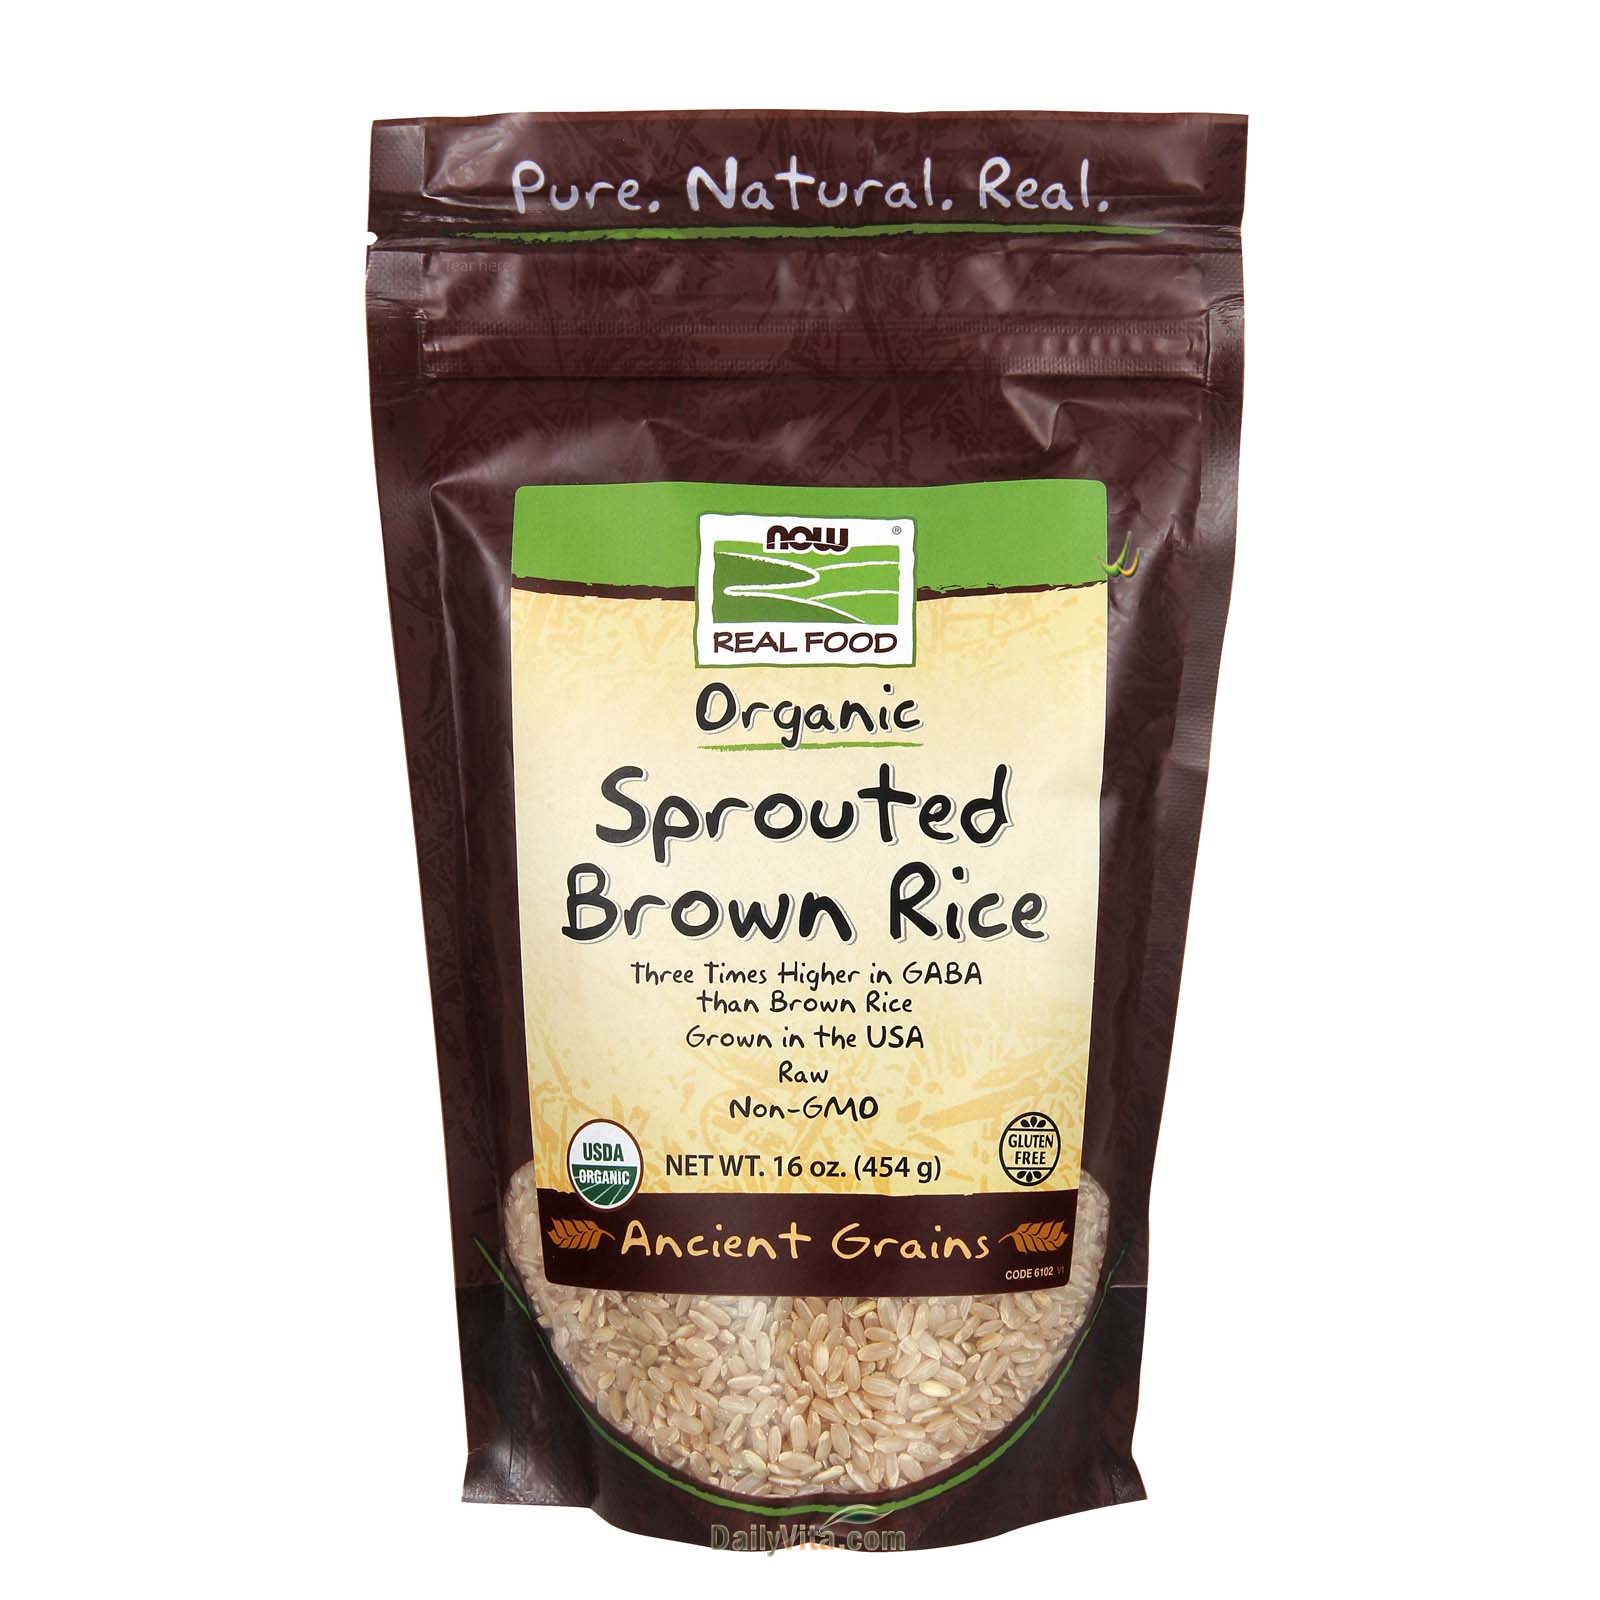 NOW® Sprouted Brown Rice, Organic - 16 oz.